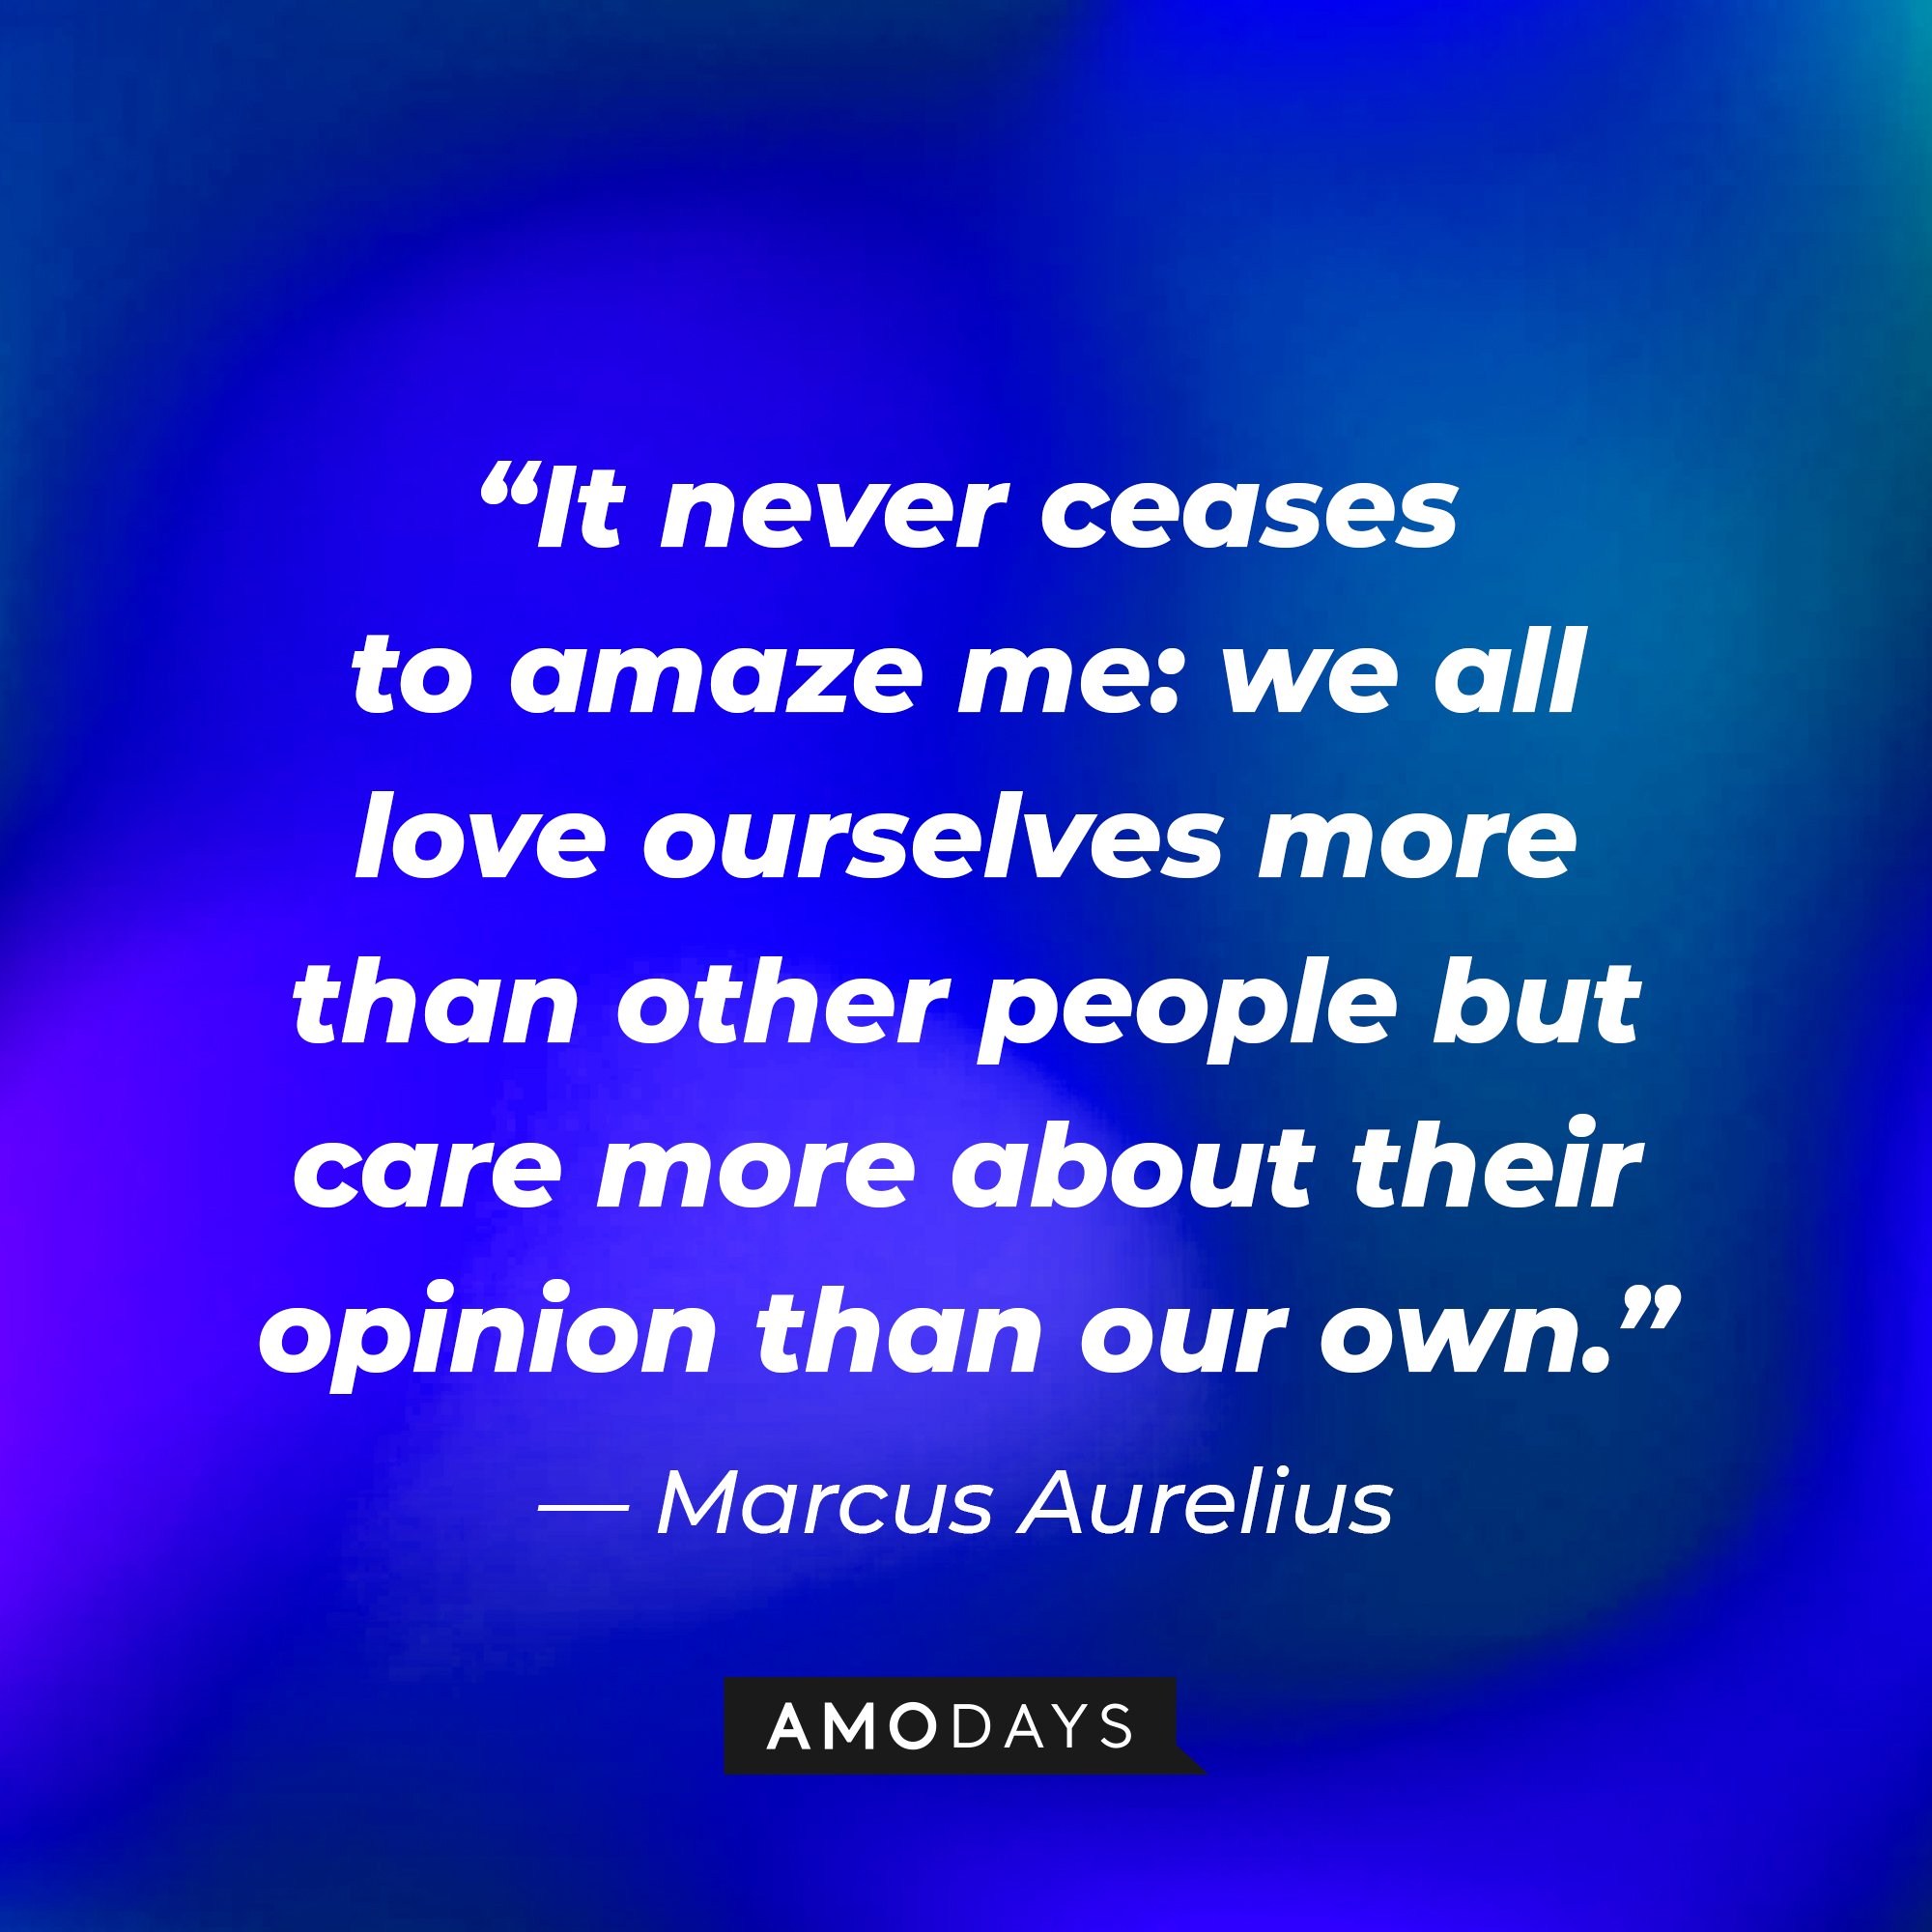 Marcus Aurelius’ quote: “It never ceases to amaze me: we all love ourselves more than other people but care more about their opinion than our own.” | Image: AmoDays